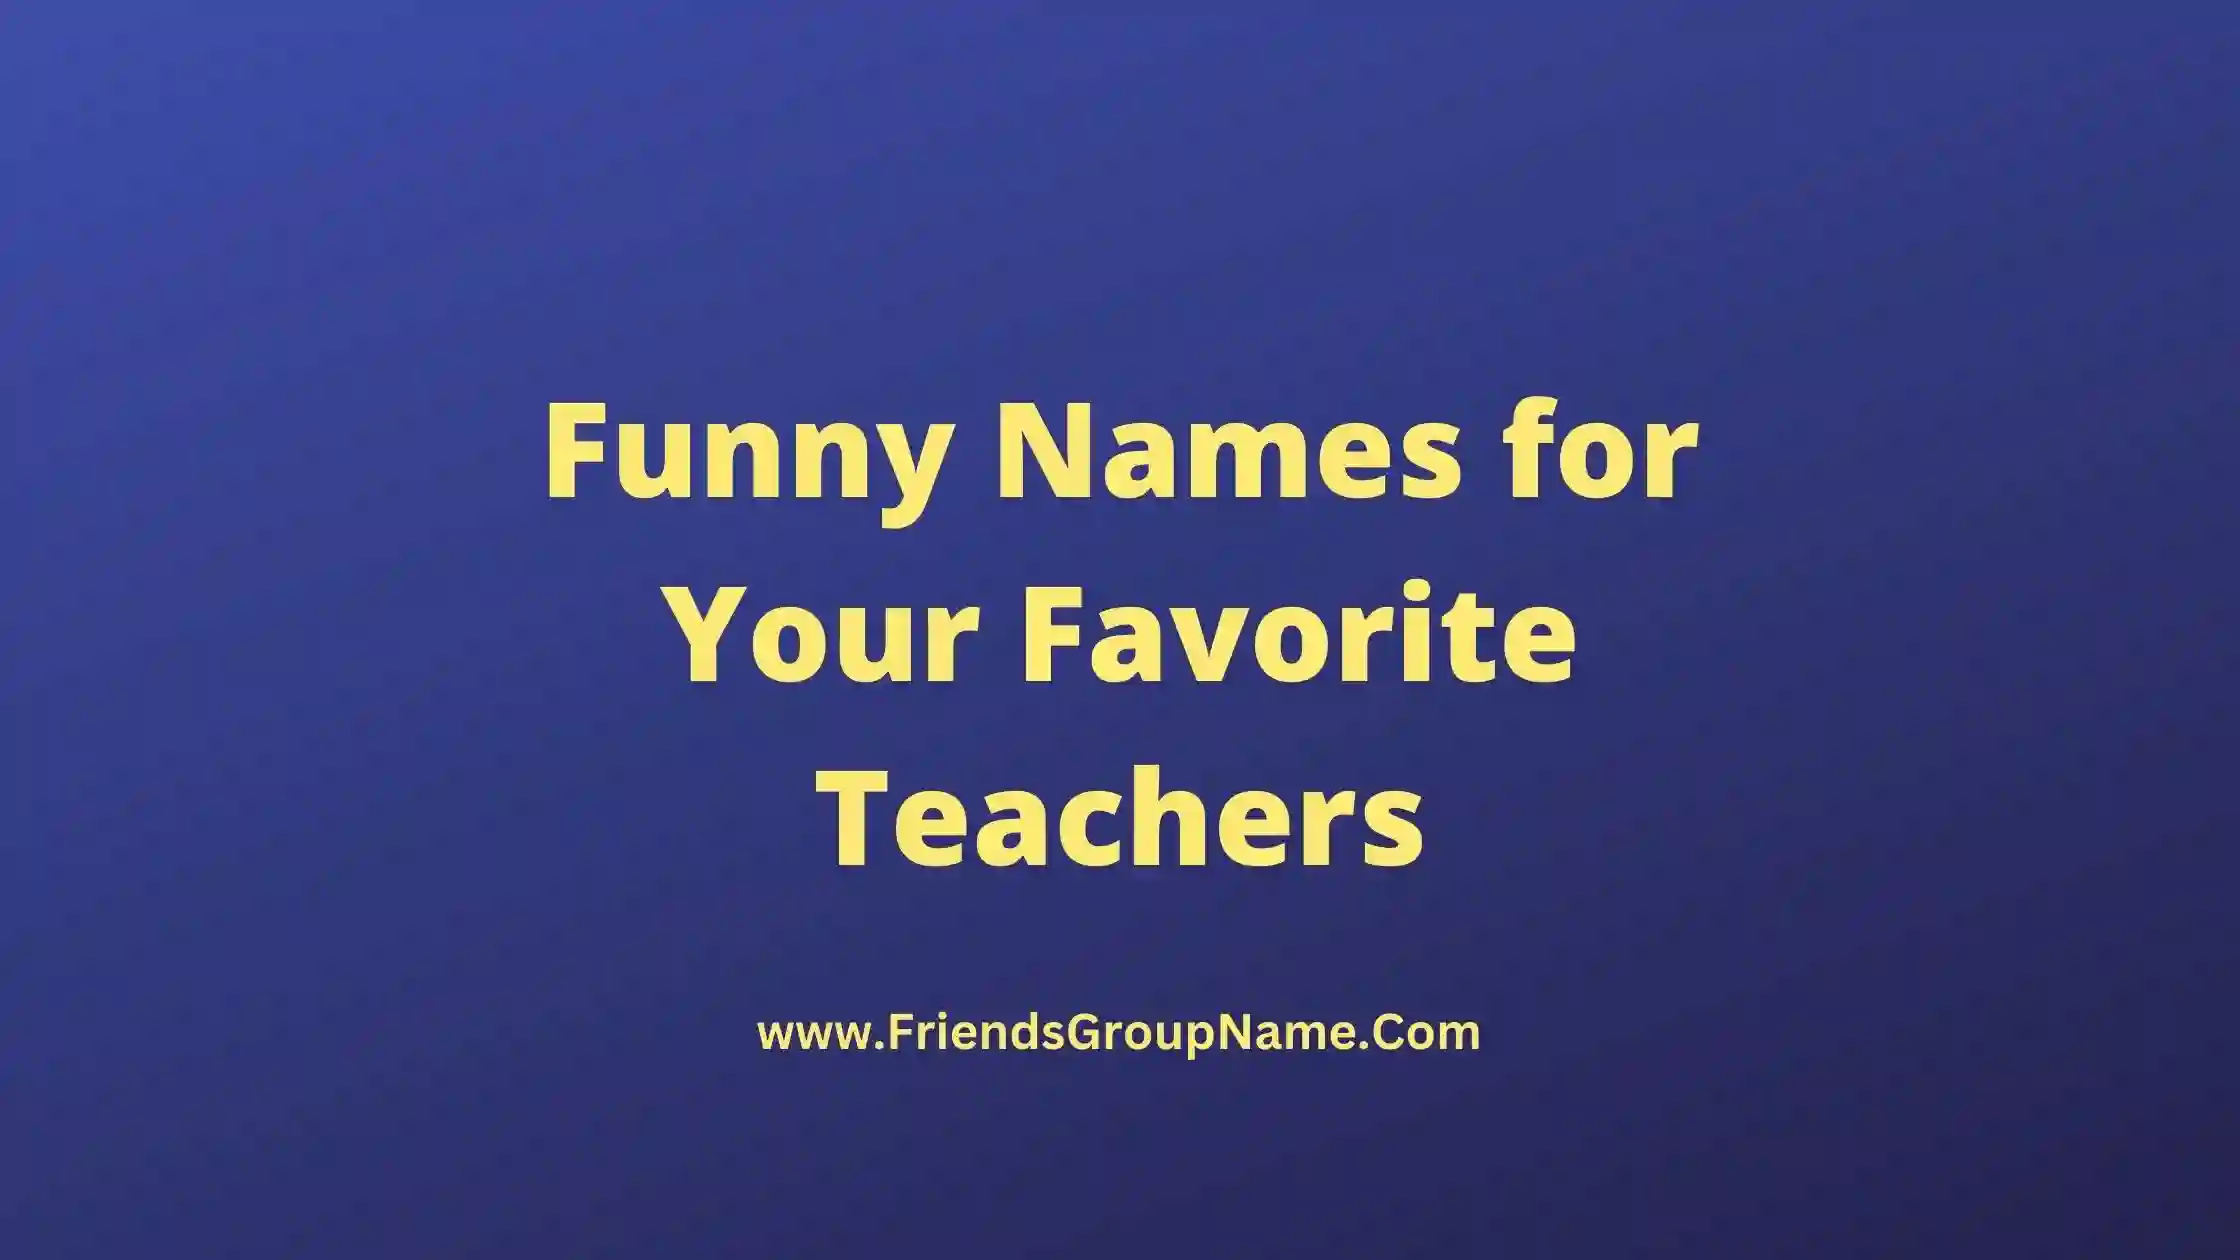 Funny Names for Your Favorite Teachers